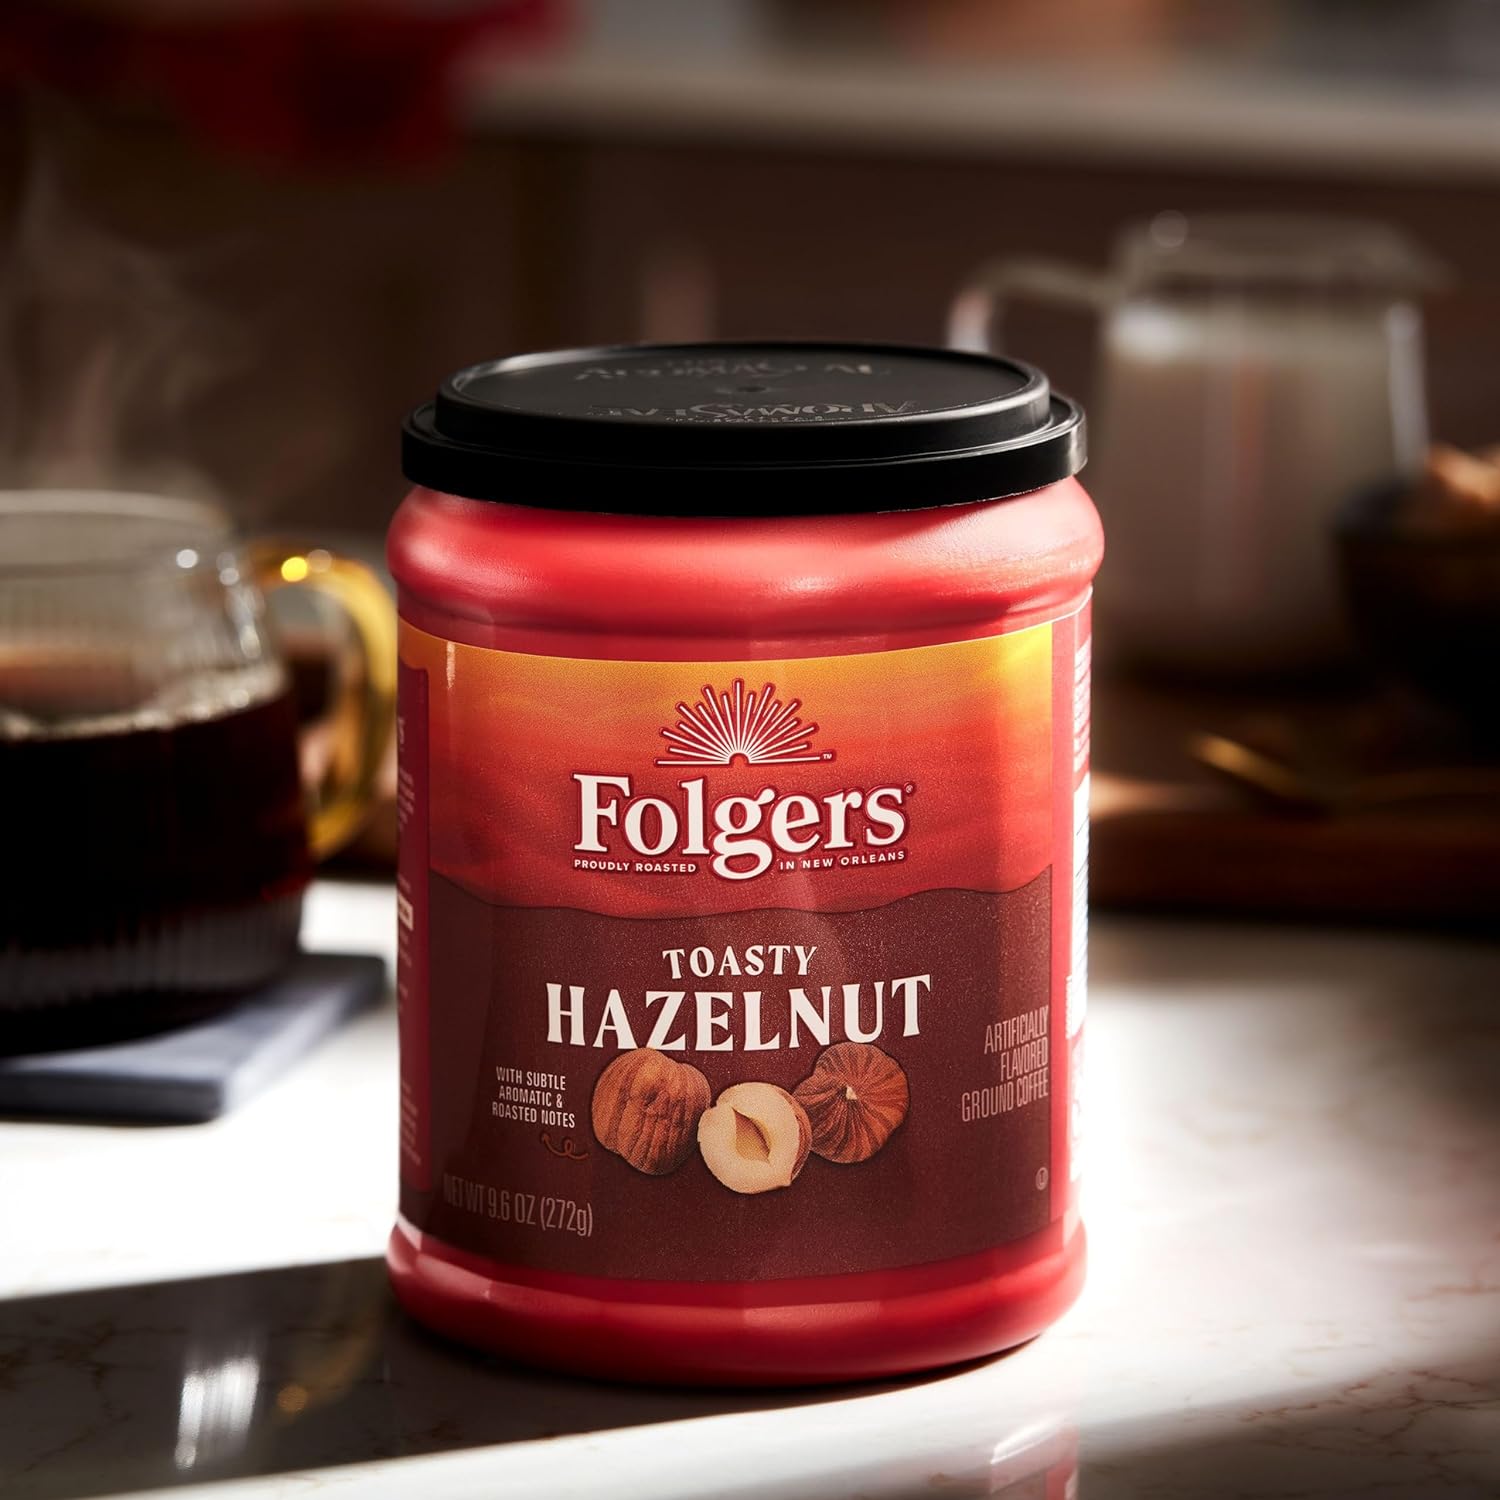 Folgers Toasty Hazelnut Flavored Ground Coffee, 9.6 Ounce Canister (Pack of 6) : Grocery & Gourmet Food